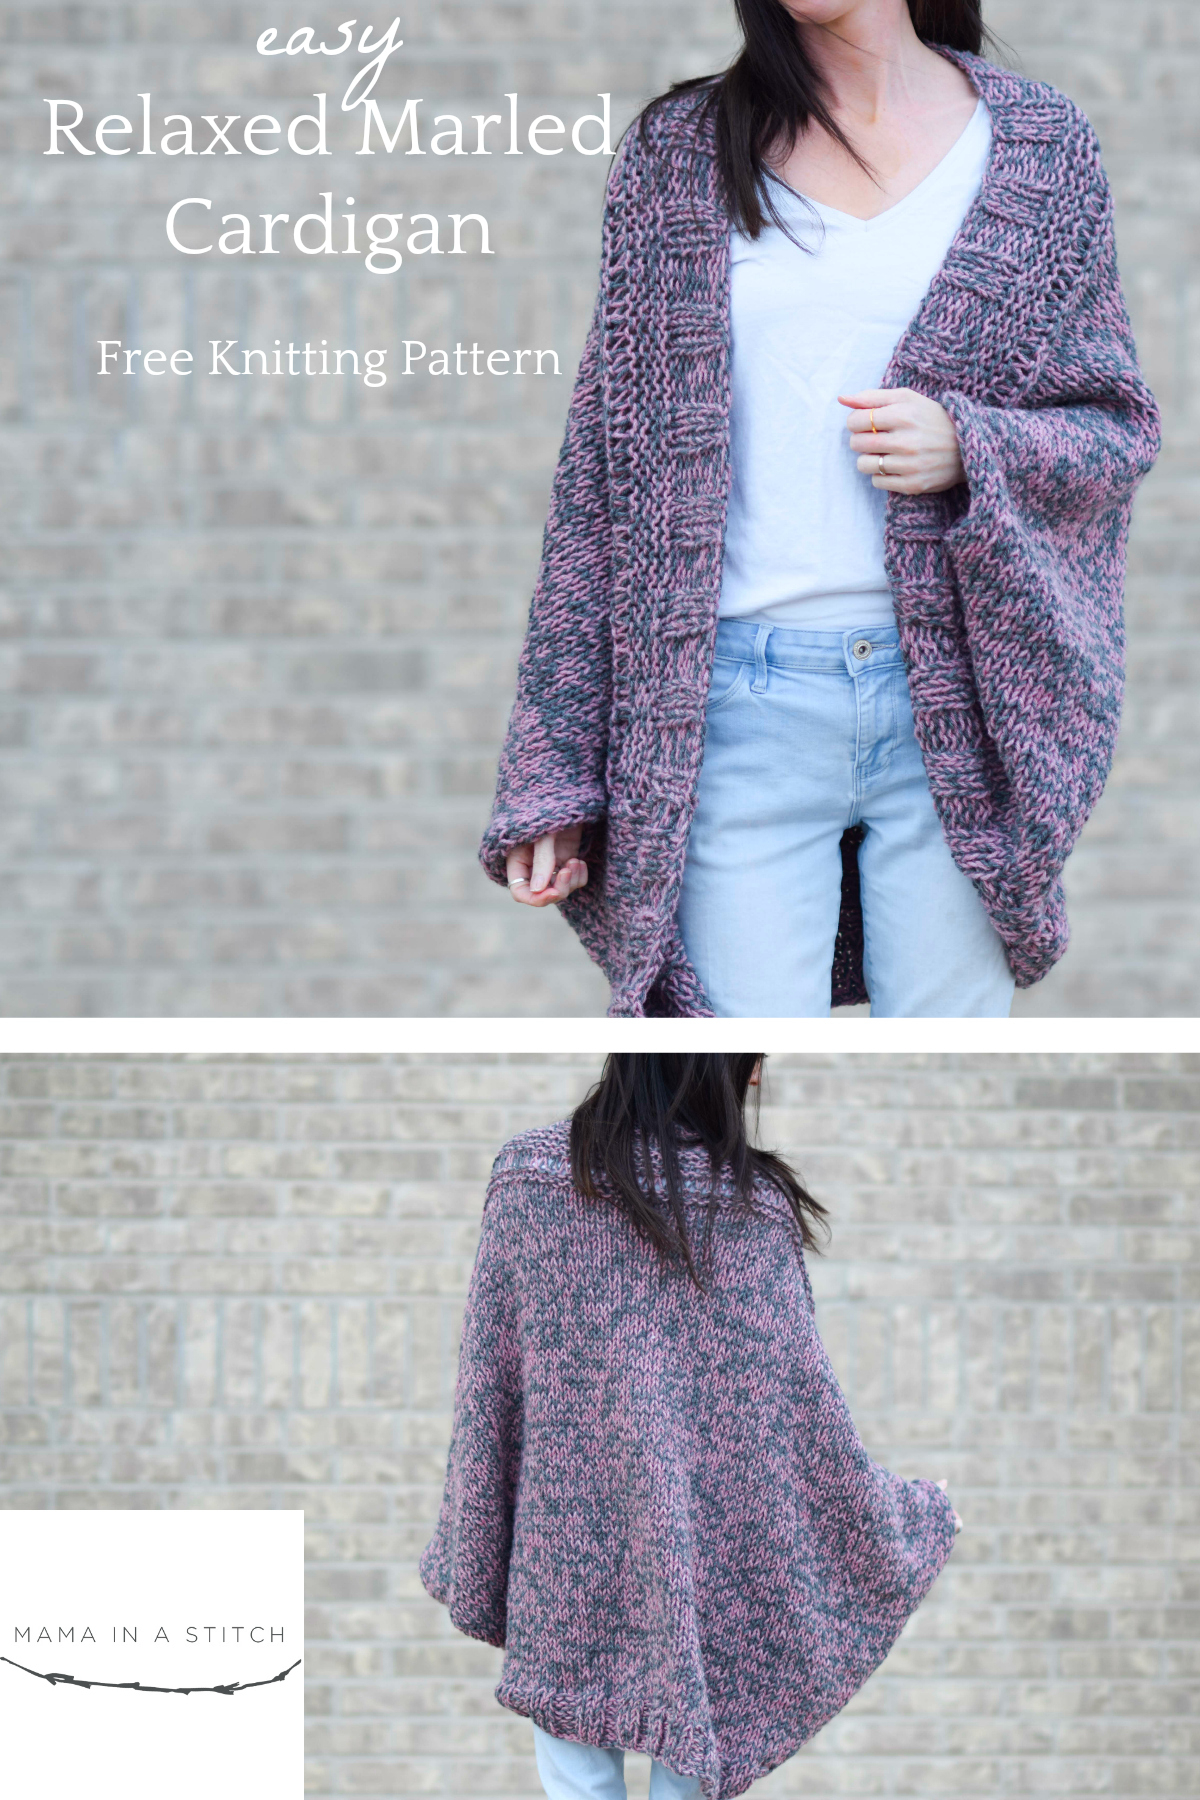 Easy Jumper Knitting Pattern Easy Relaxed Marled Cardigan Knitting Pattern Mama In A Stitch